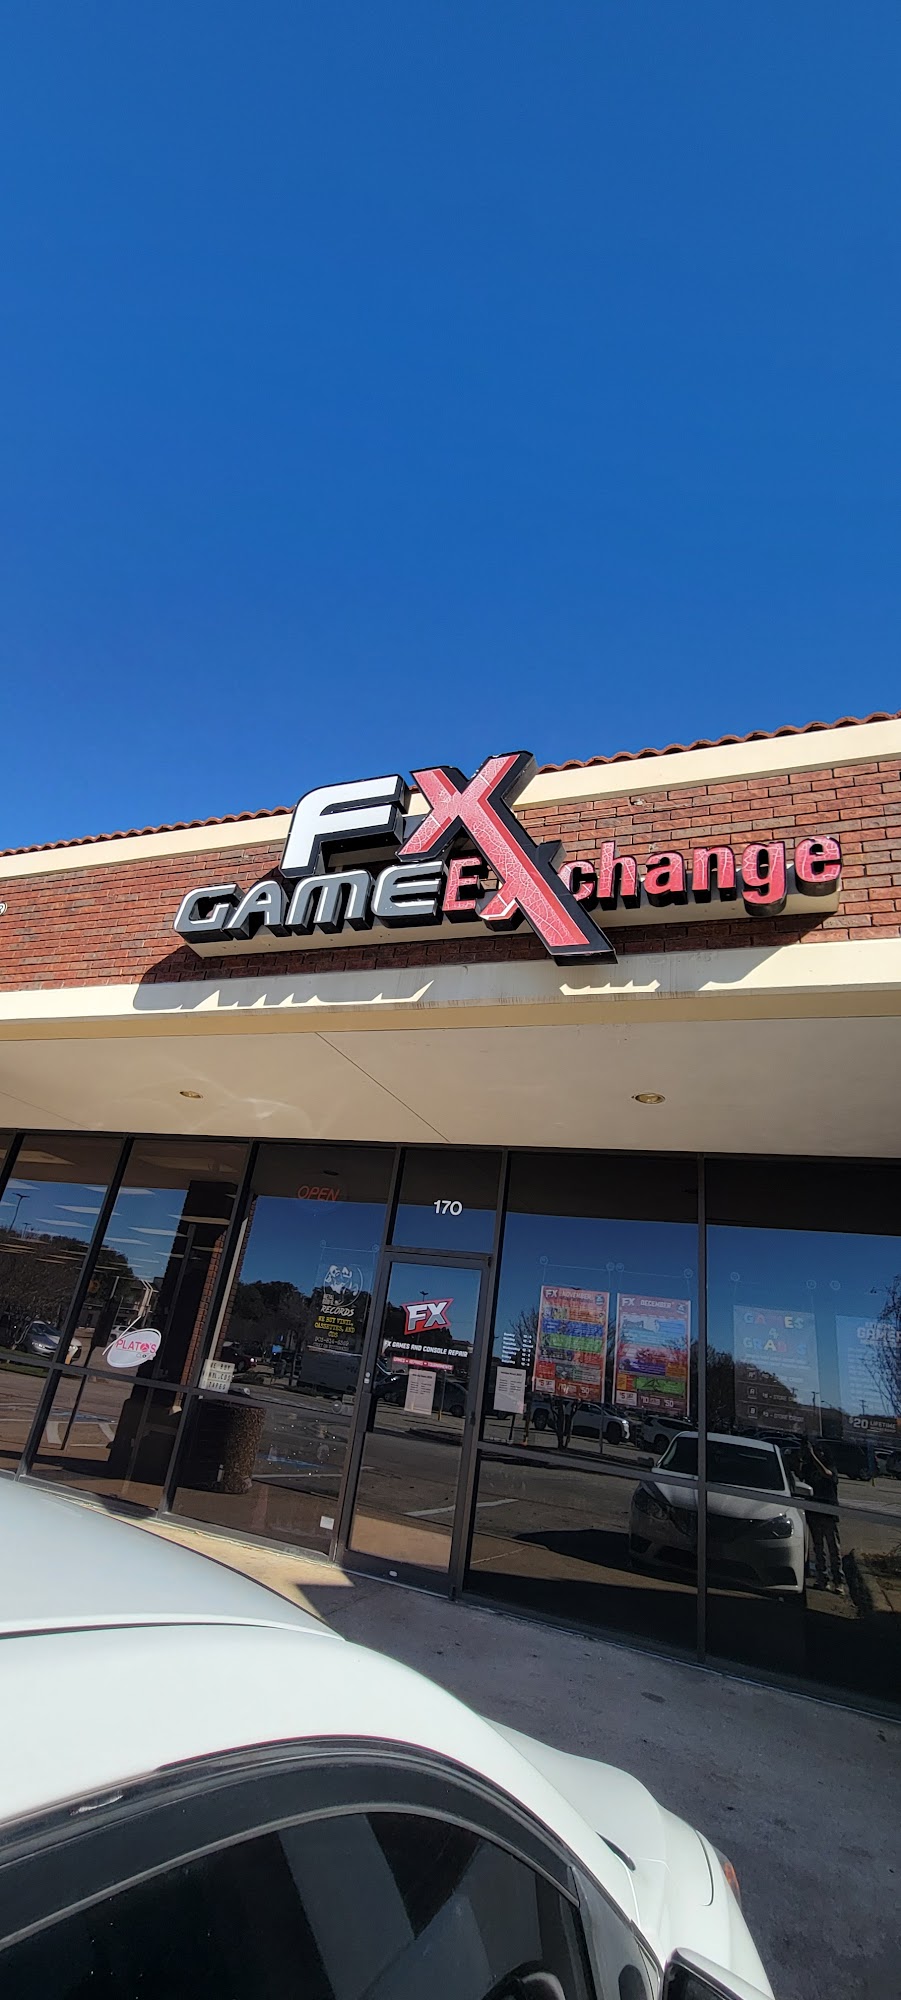 FX Games and Console Repair